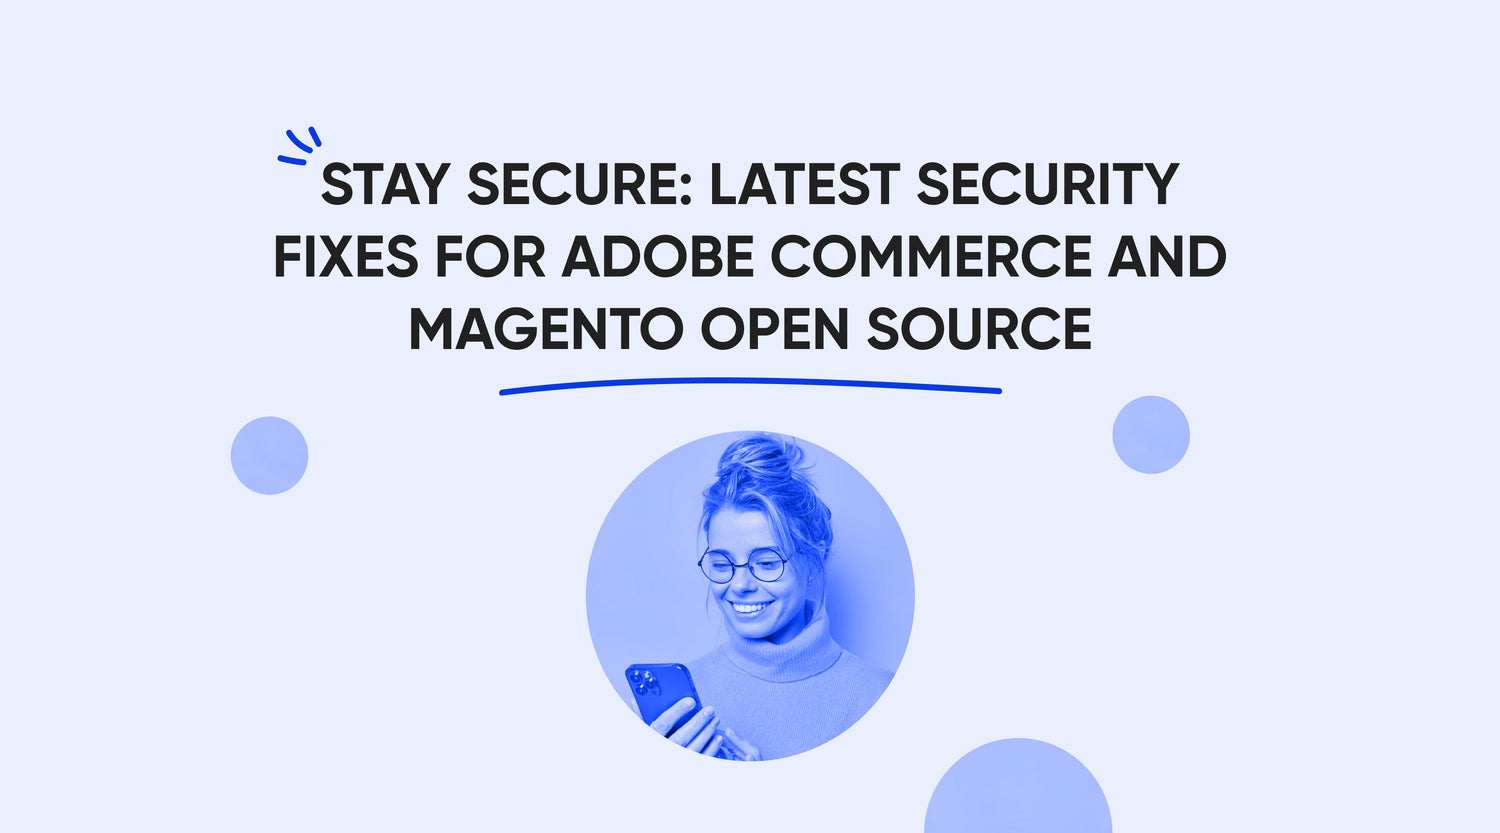 Stay secure: latest security fixes for Adobe Commerce and Magento Open Source